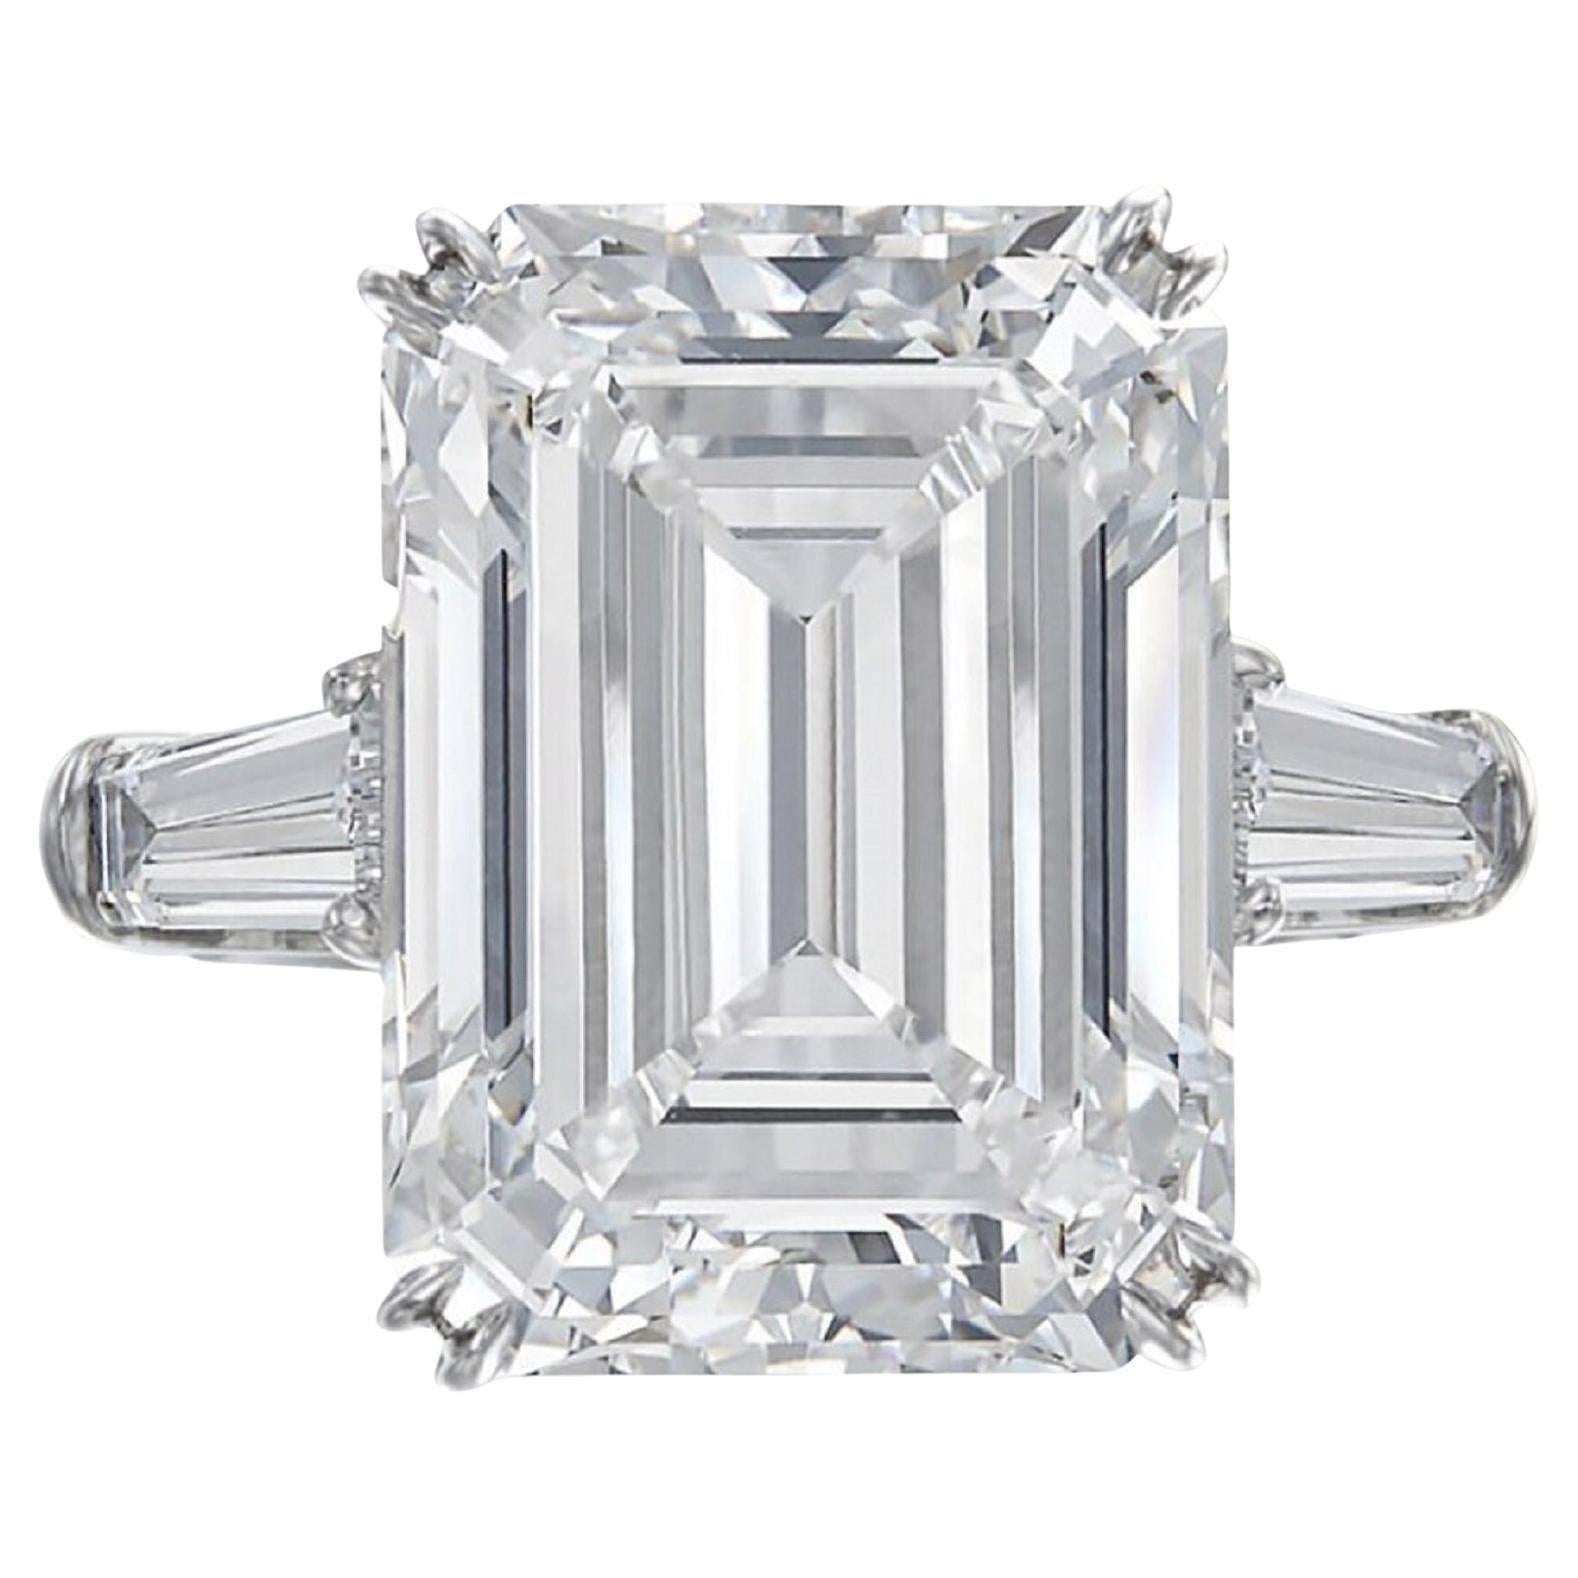 Exceptional GIA Certified 8 Carat Emerald Cut Diamond Solitaire Ring VVS2